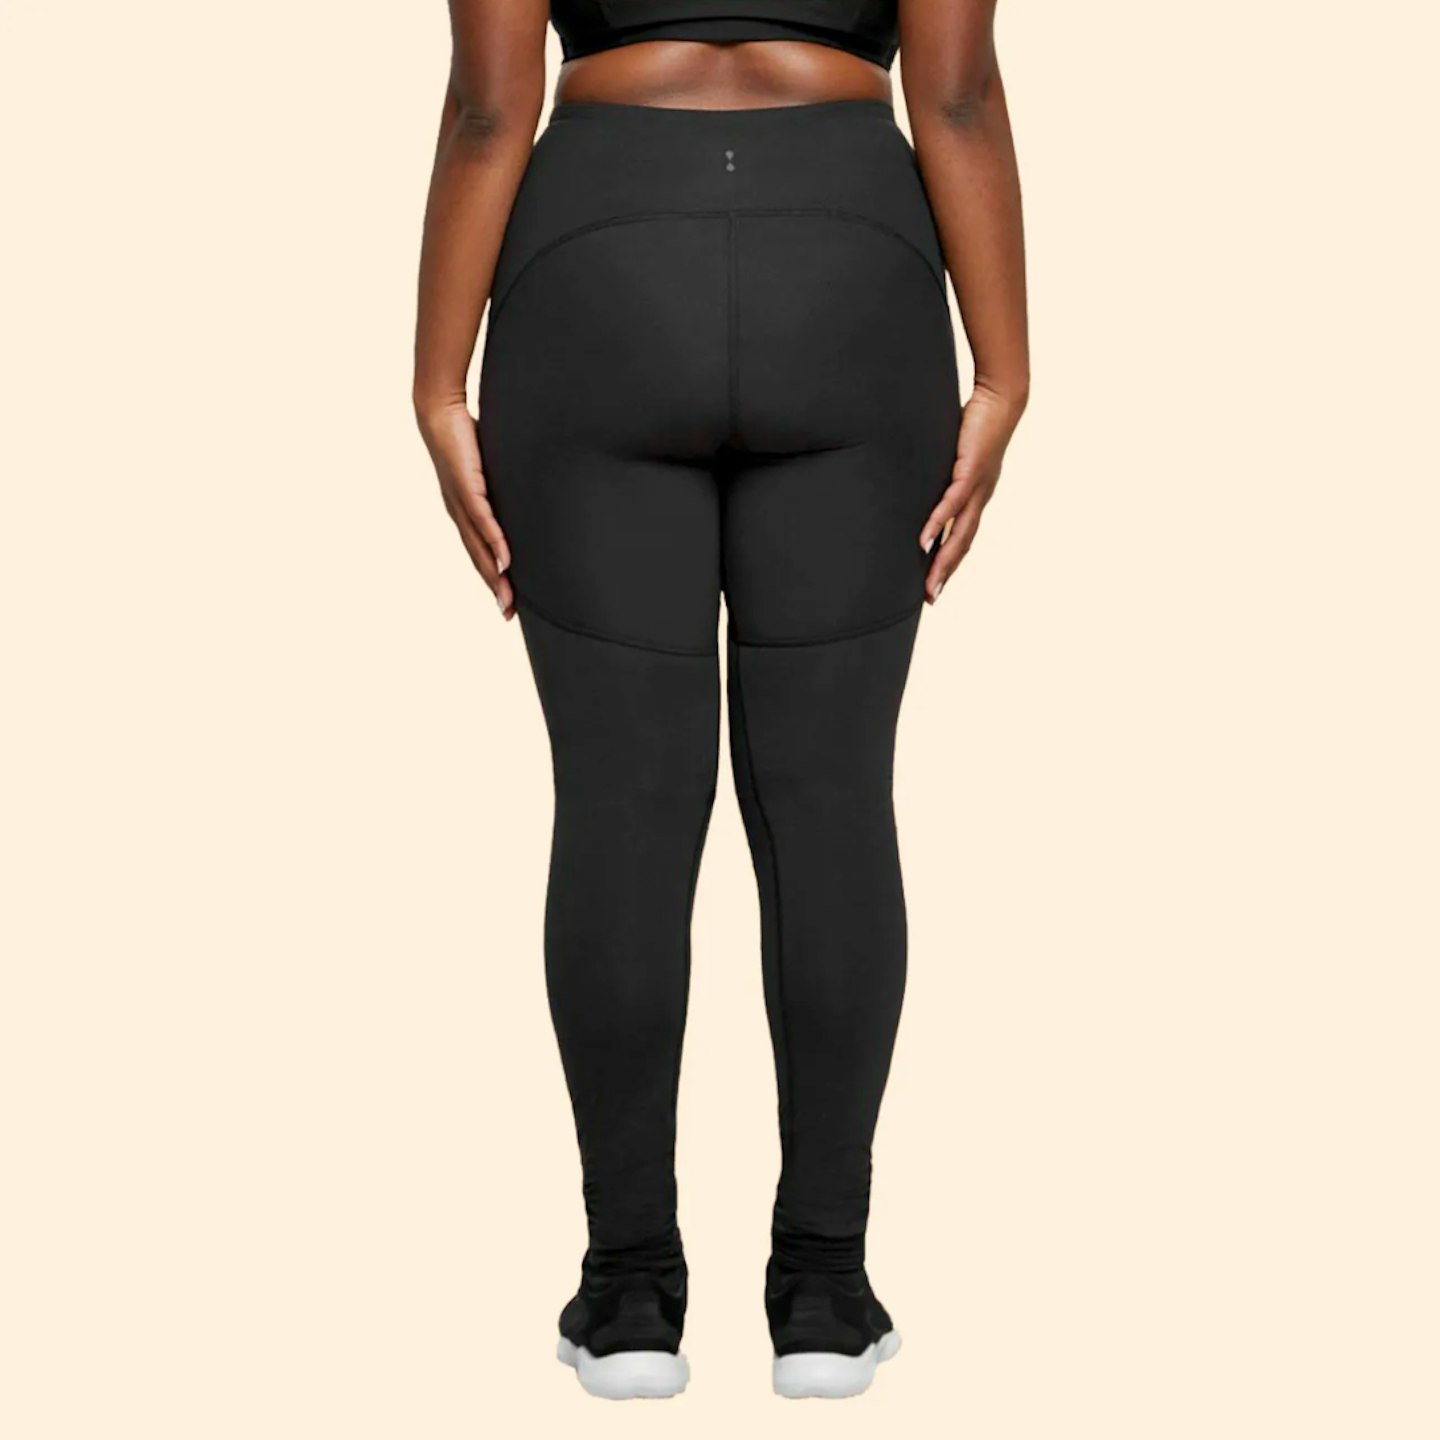 Modibodi's period gym leggings are amazing - here's our review